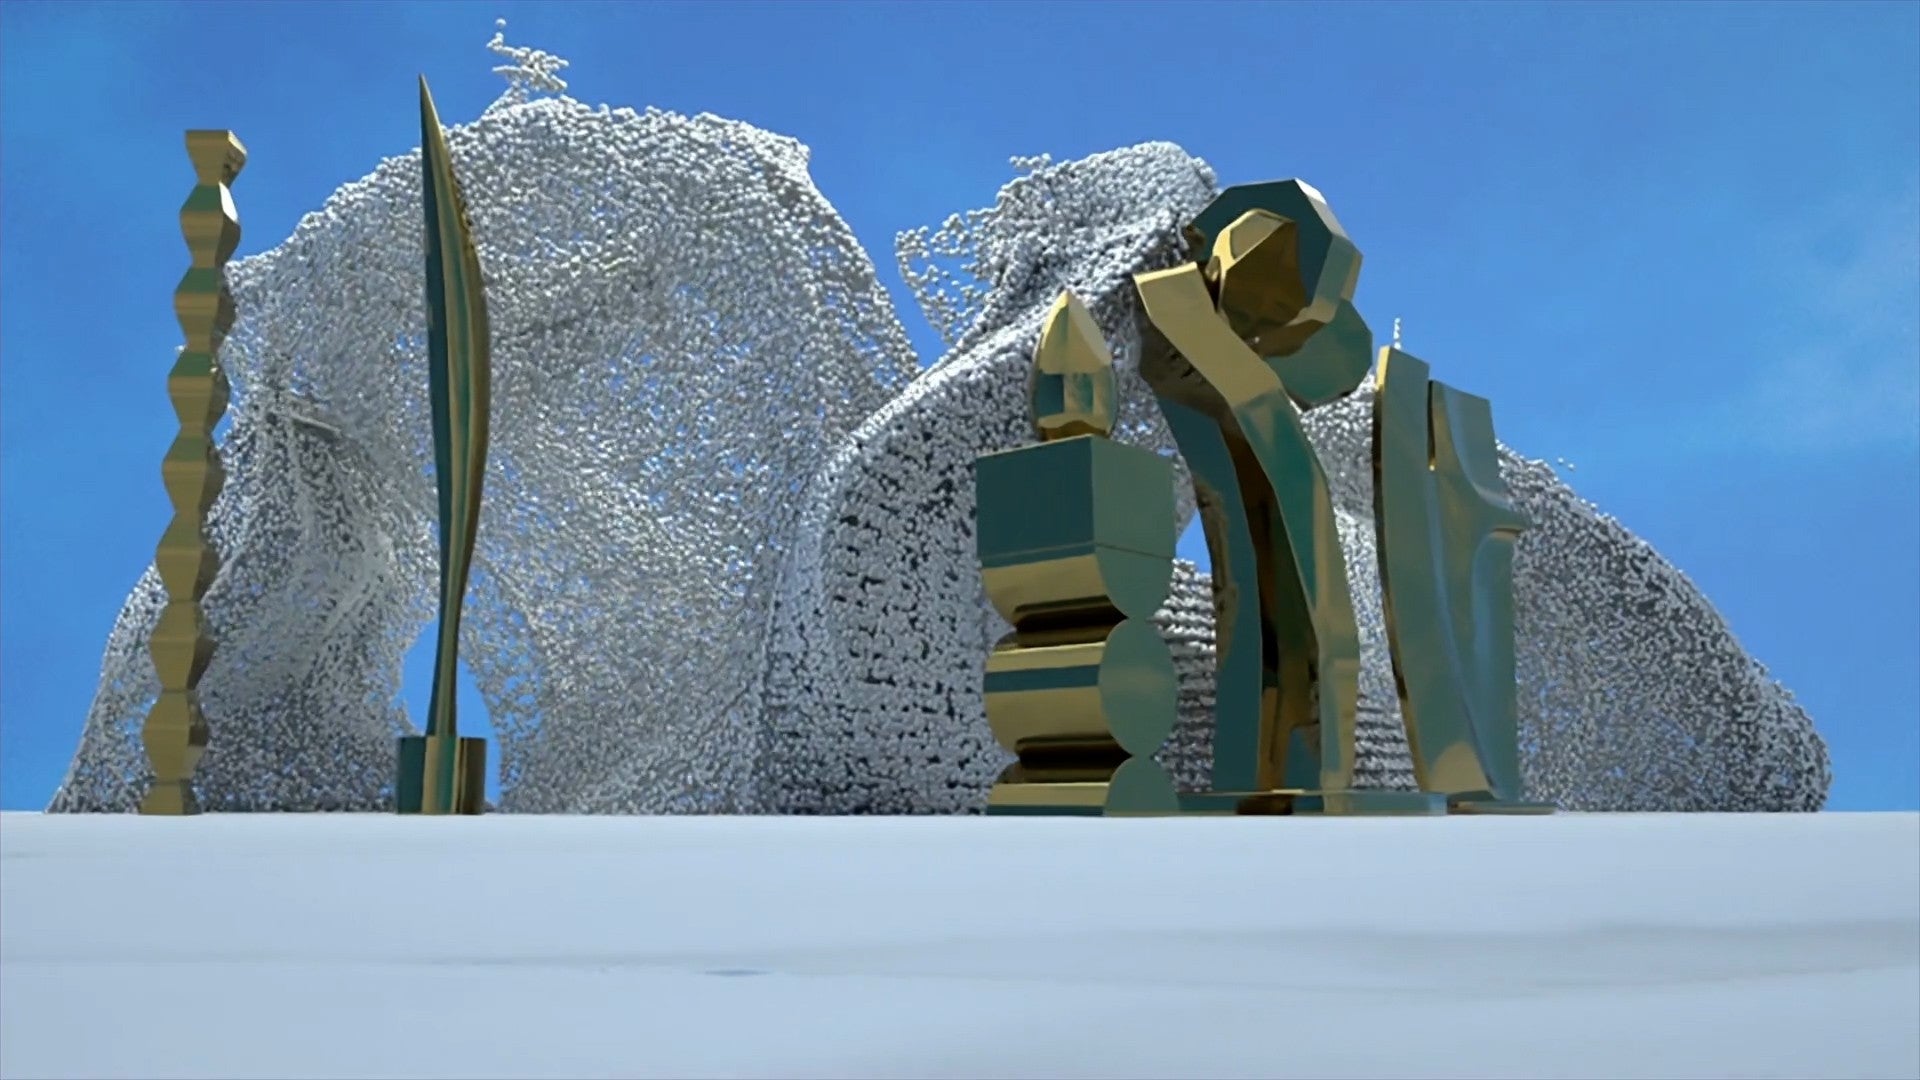 Thumbnail for video art featuring a swirling mass of silver particles juxtaposed with geometric golden structures, blending classic sculpture aesthetics with futuristic elements.